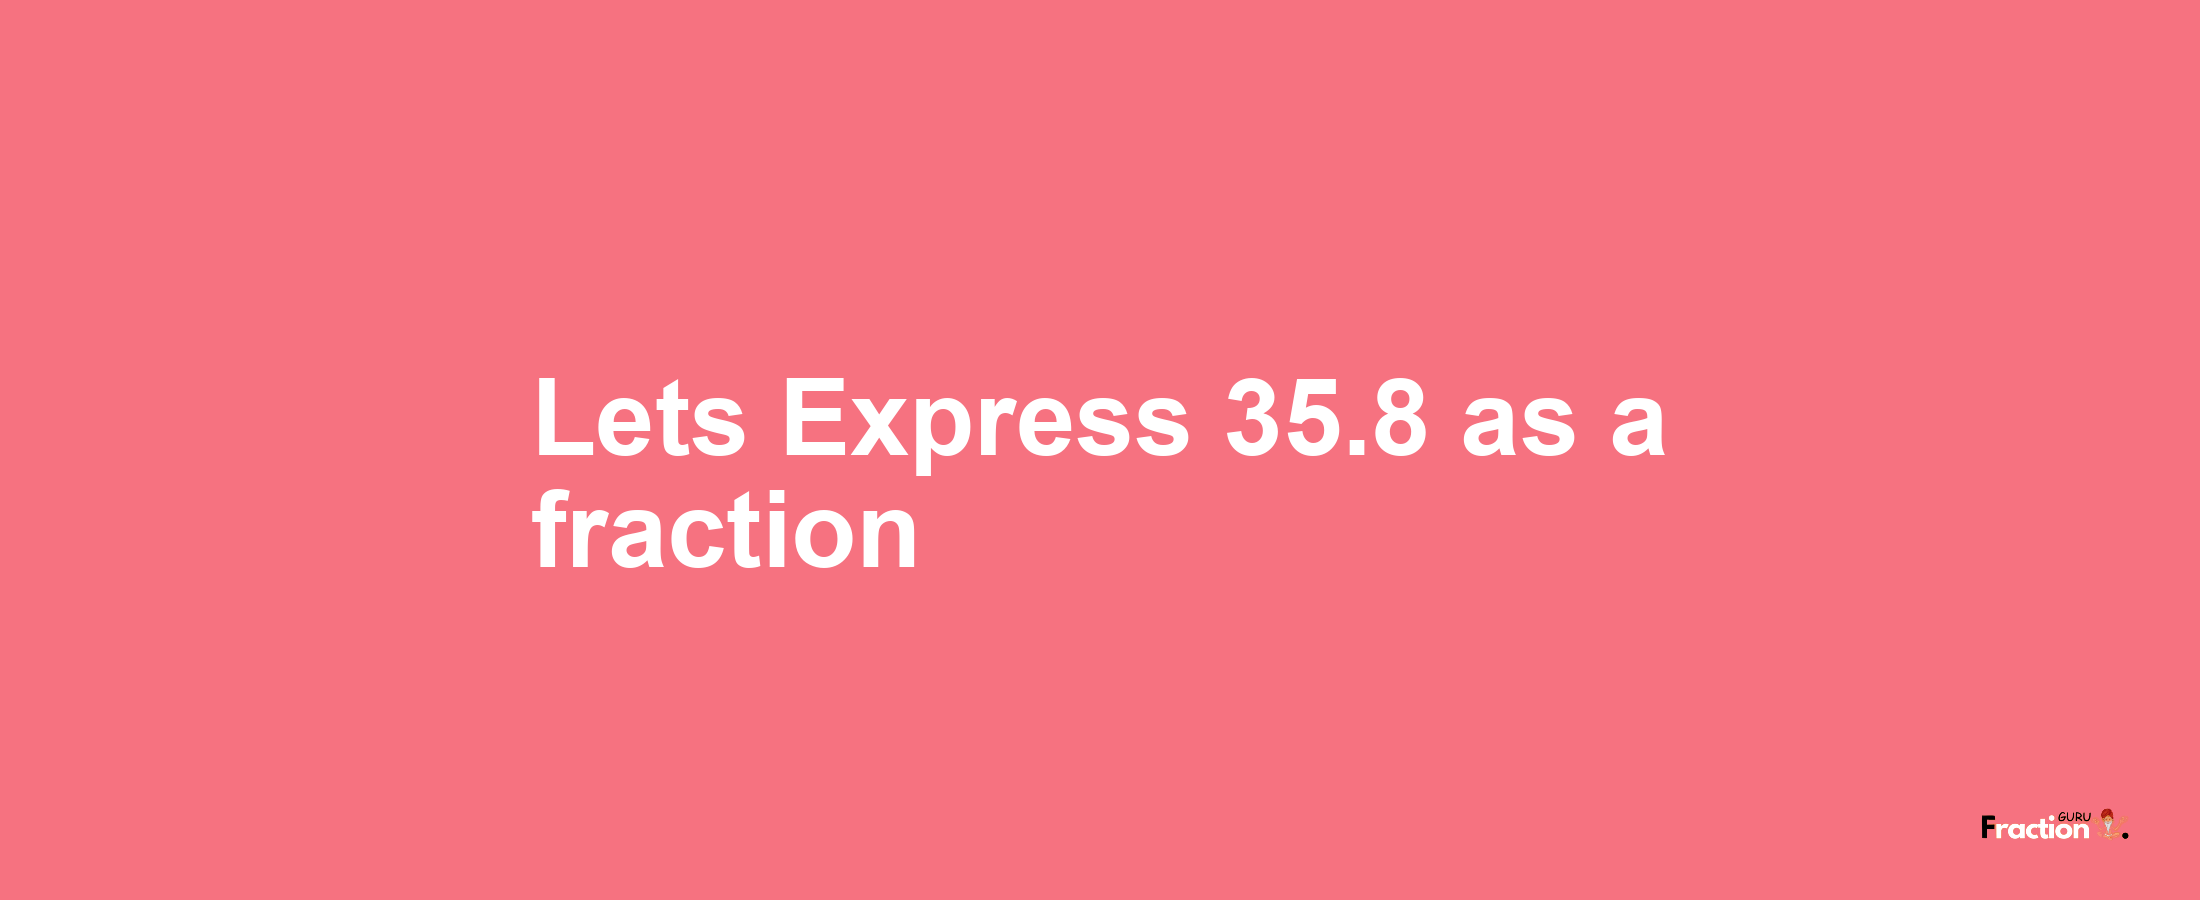 Lets Express 35.8 as afraction